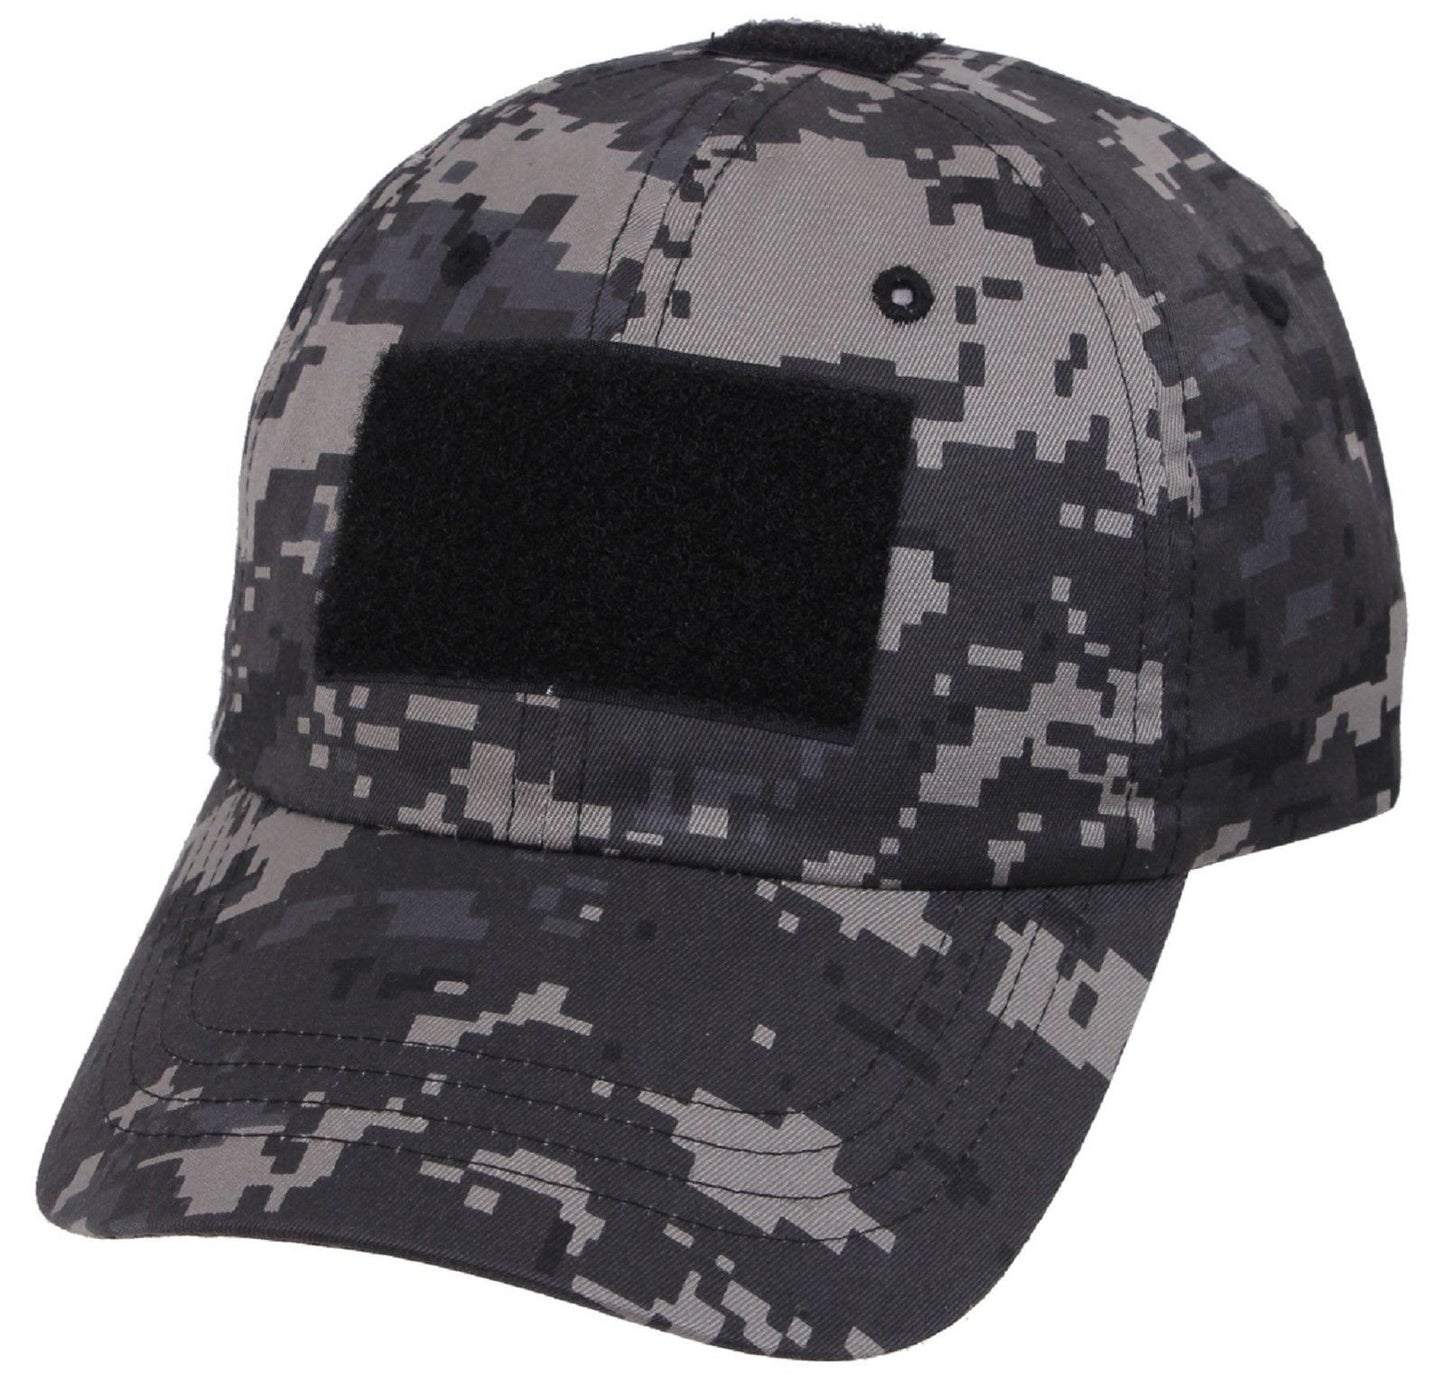 Subdued Urban Digital Camouflage Tactical Operator Cap - Patch Area Baseball Hat